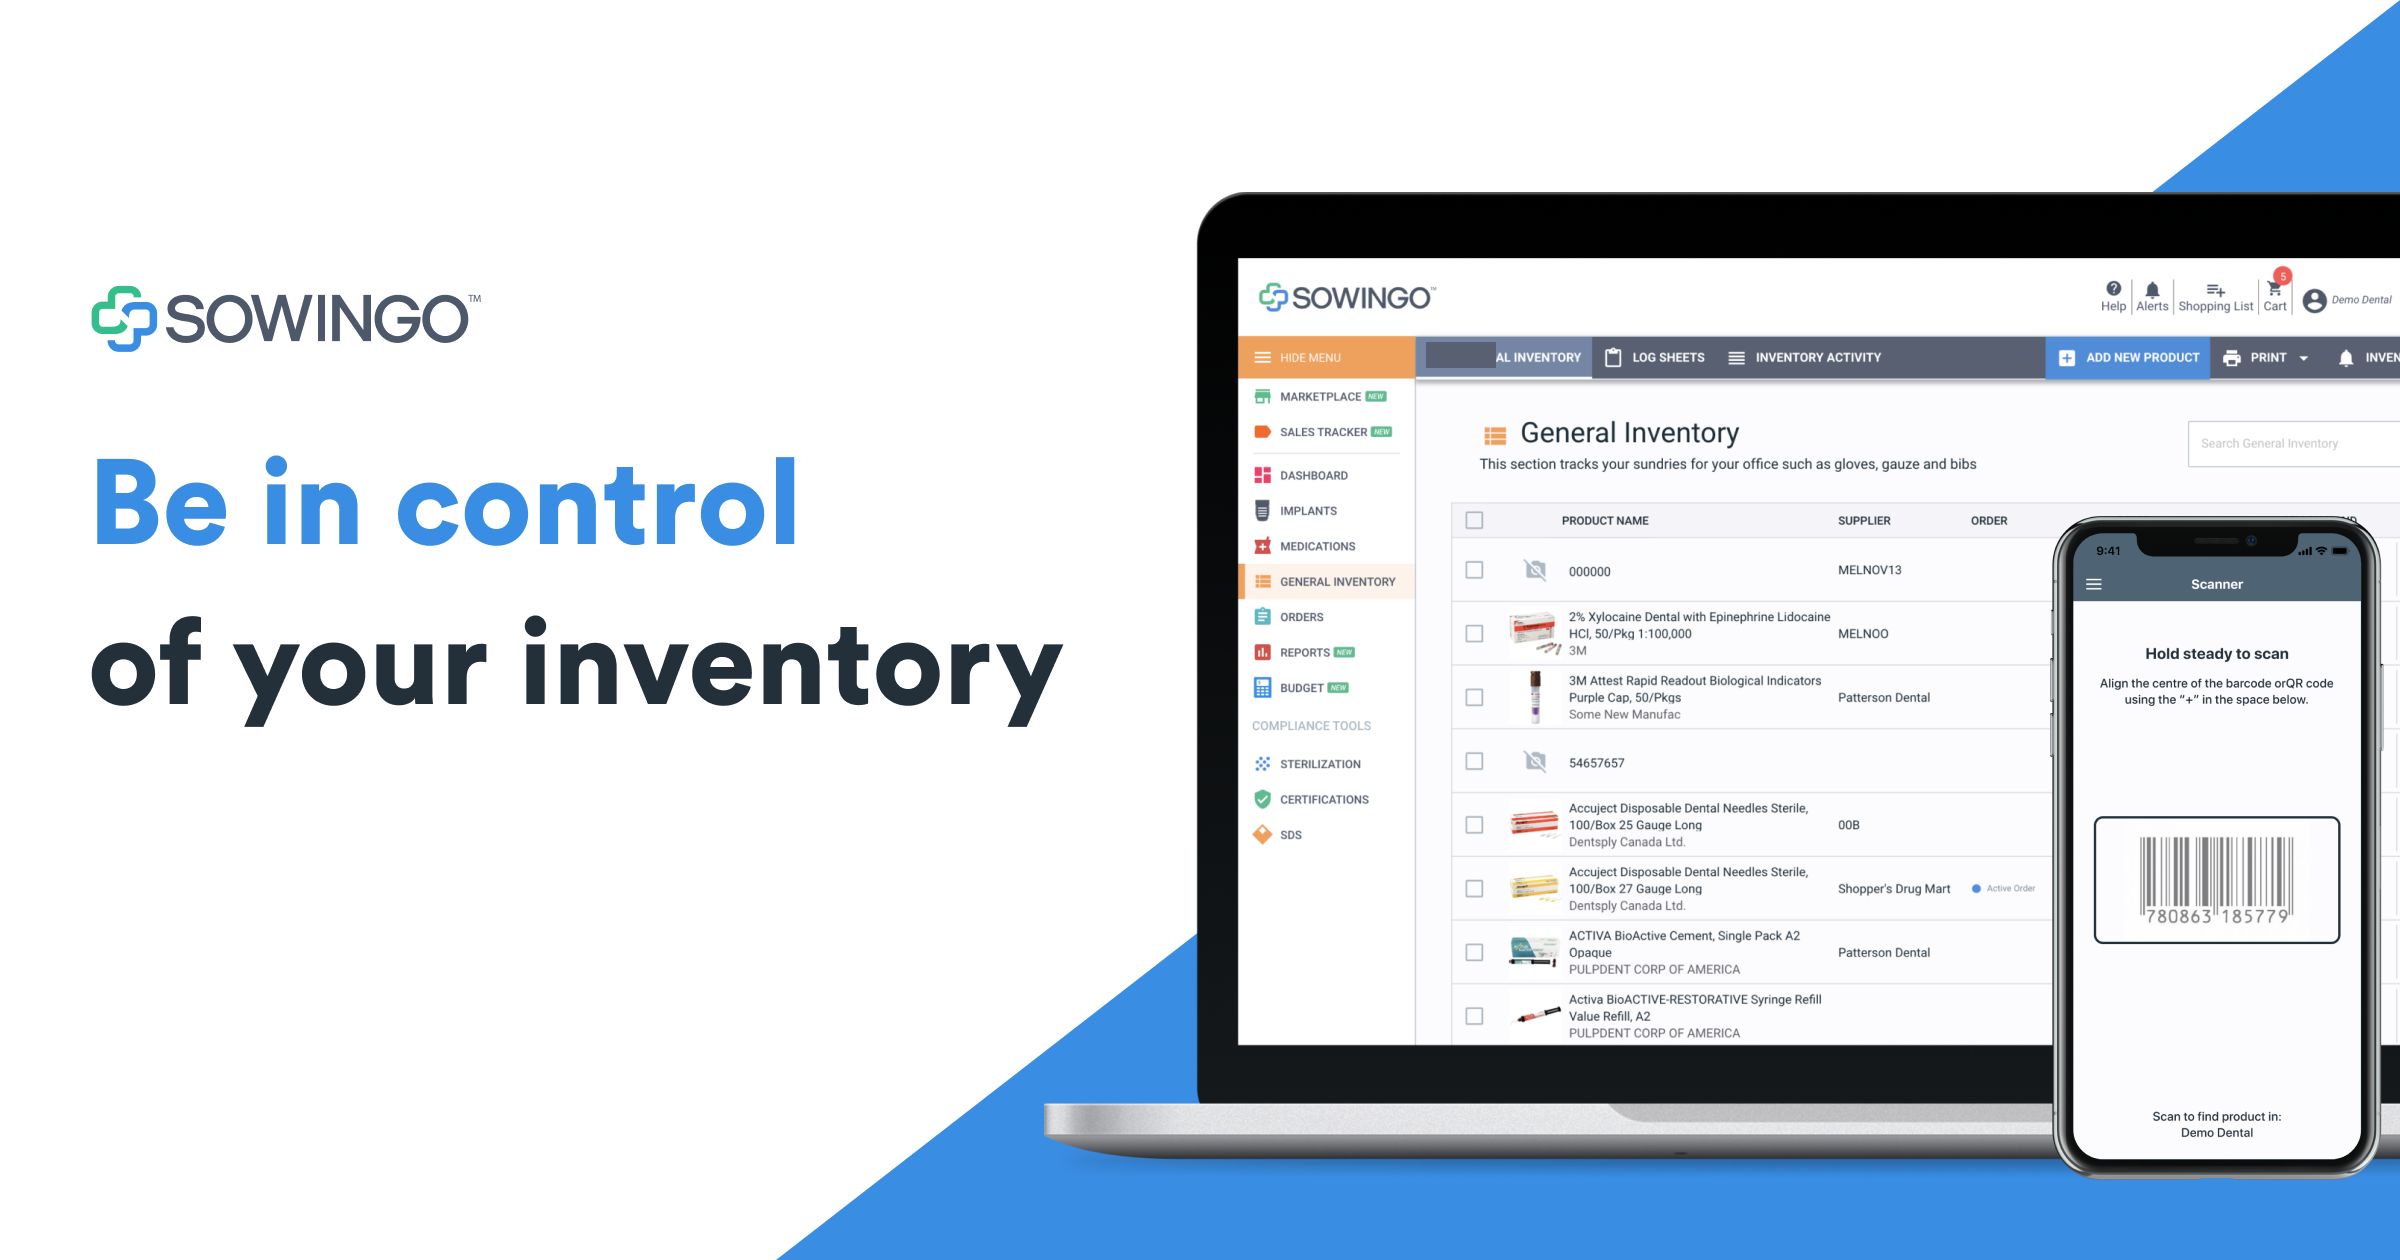 Sowingo Software - Sowingo is North America’s #1 cloud-based eCommerce and dental inventory management platform that enables you to save time, save money and never run out of supplies again - ever!